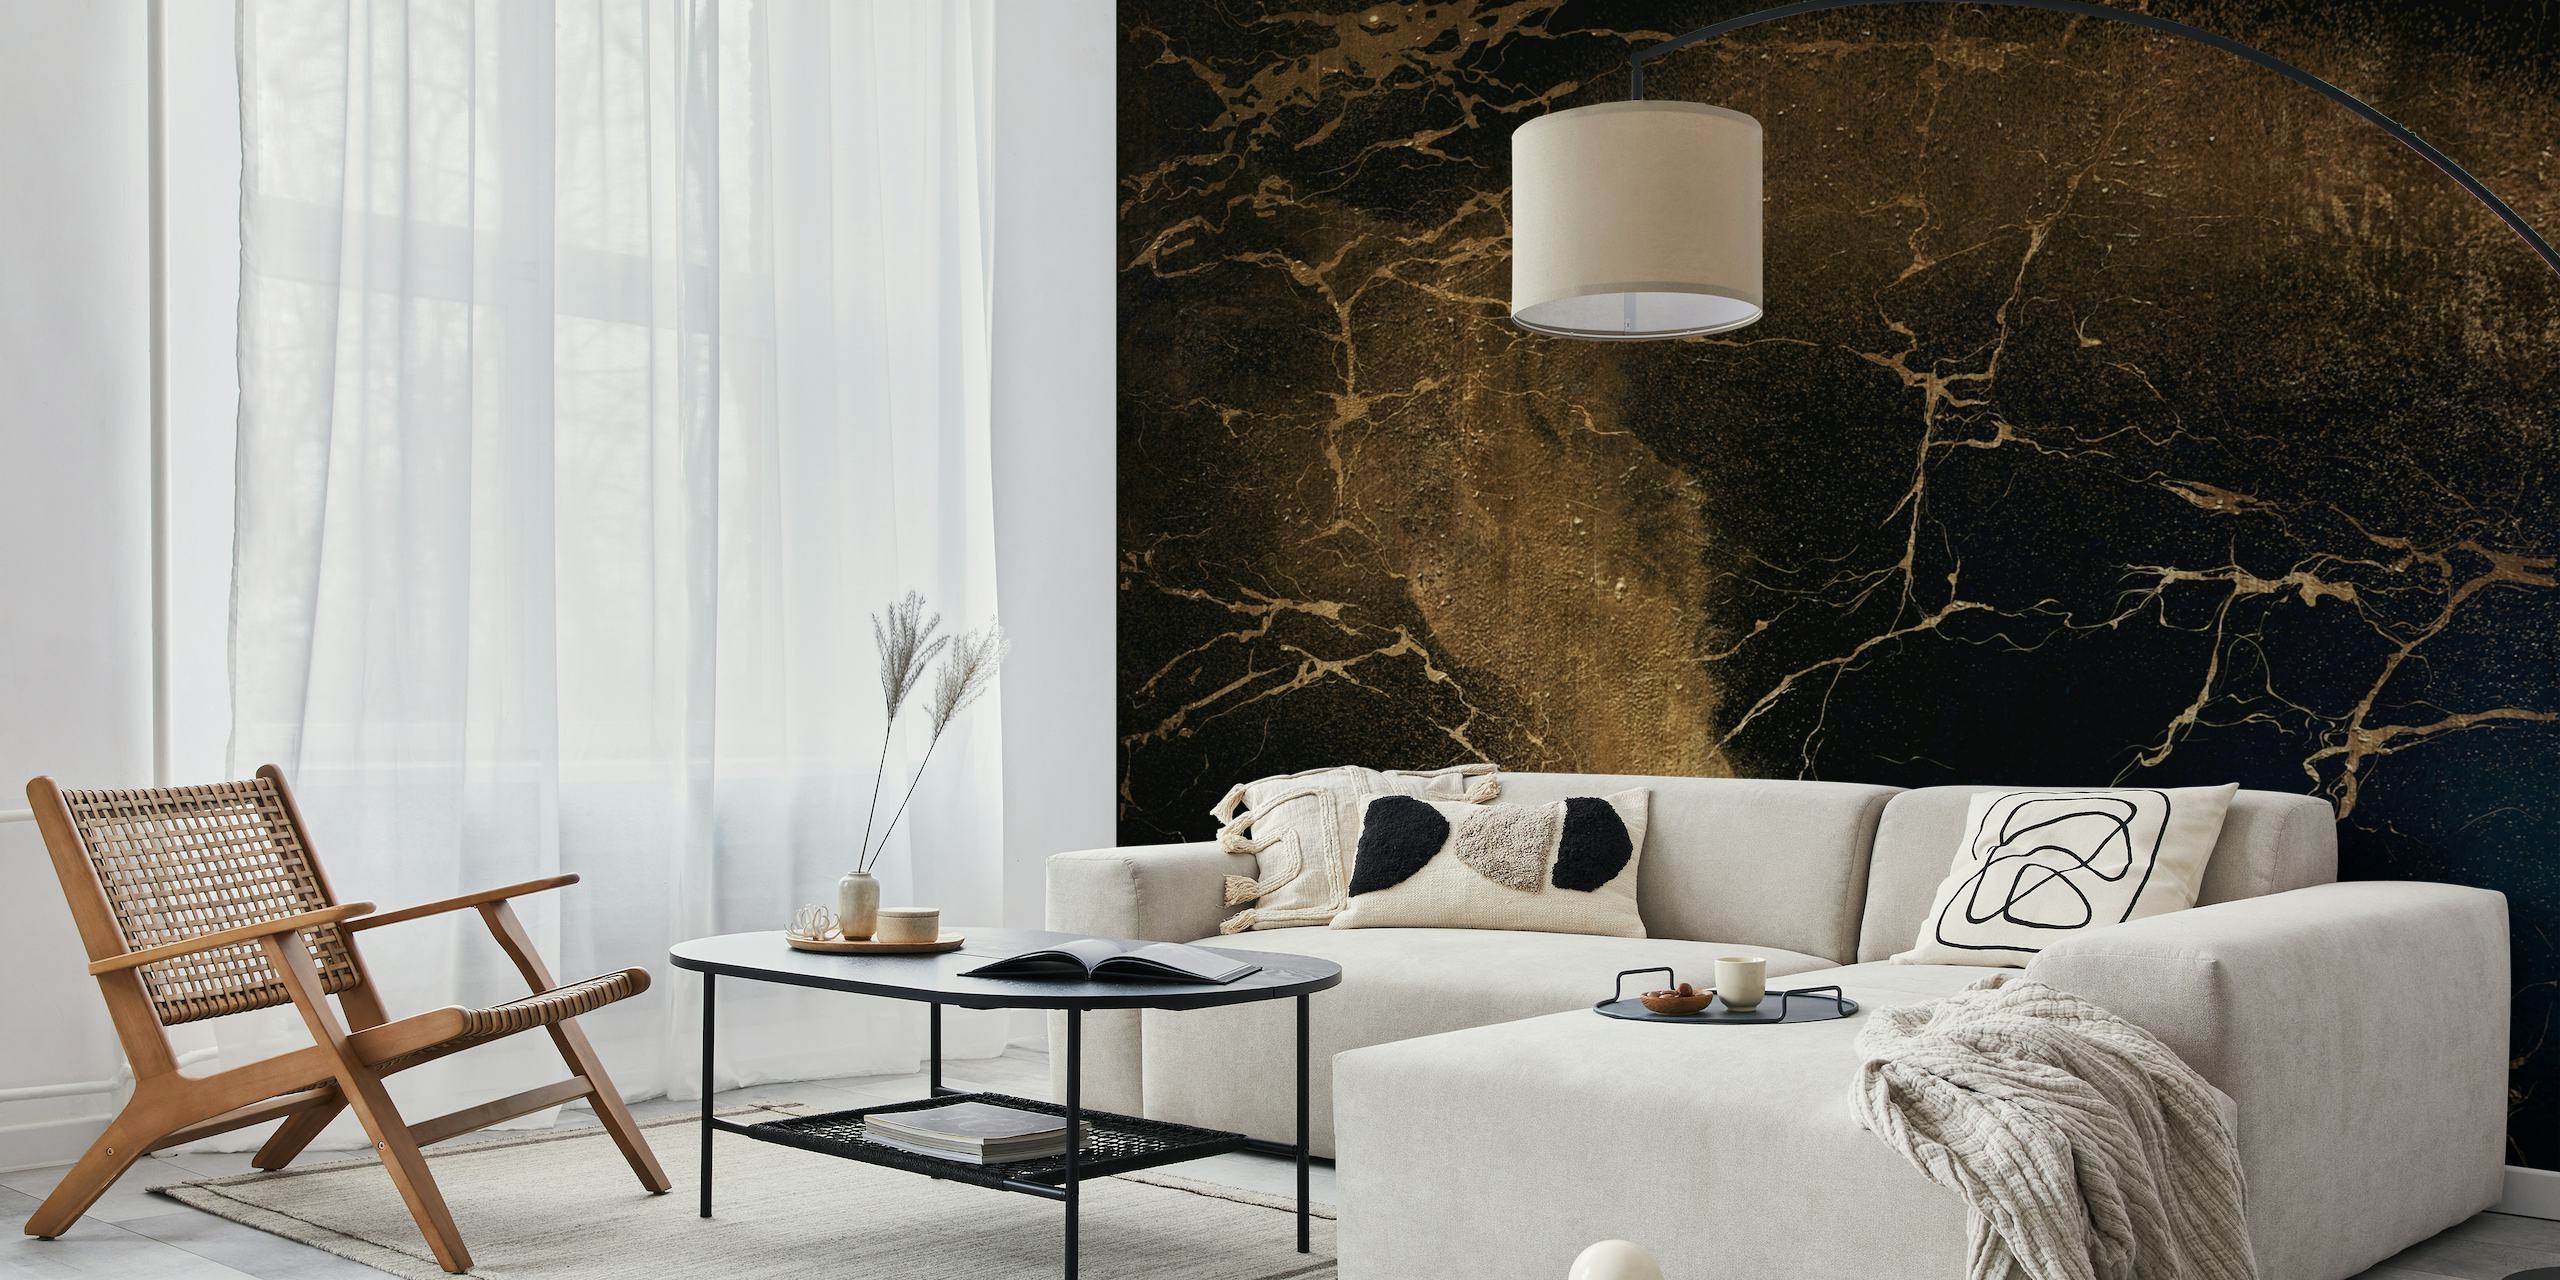 Siddharta wall mural featuring deep hues with gold lines